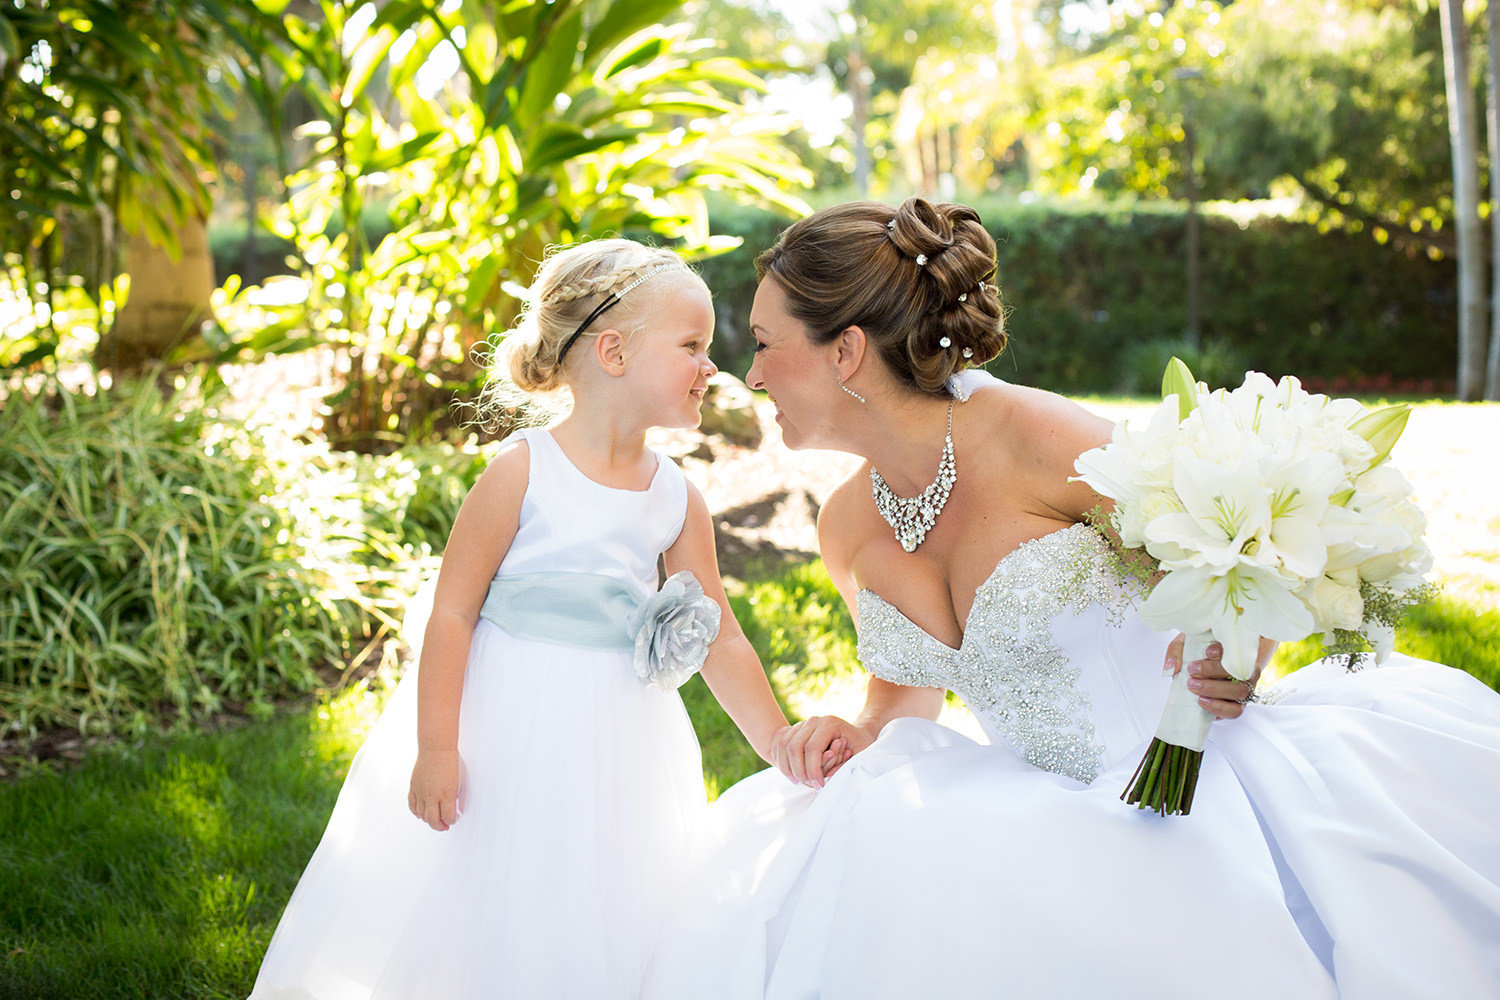 Adorable moment between the bride and her flower-girl